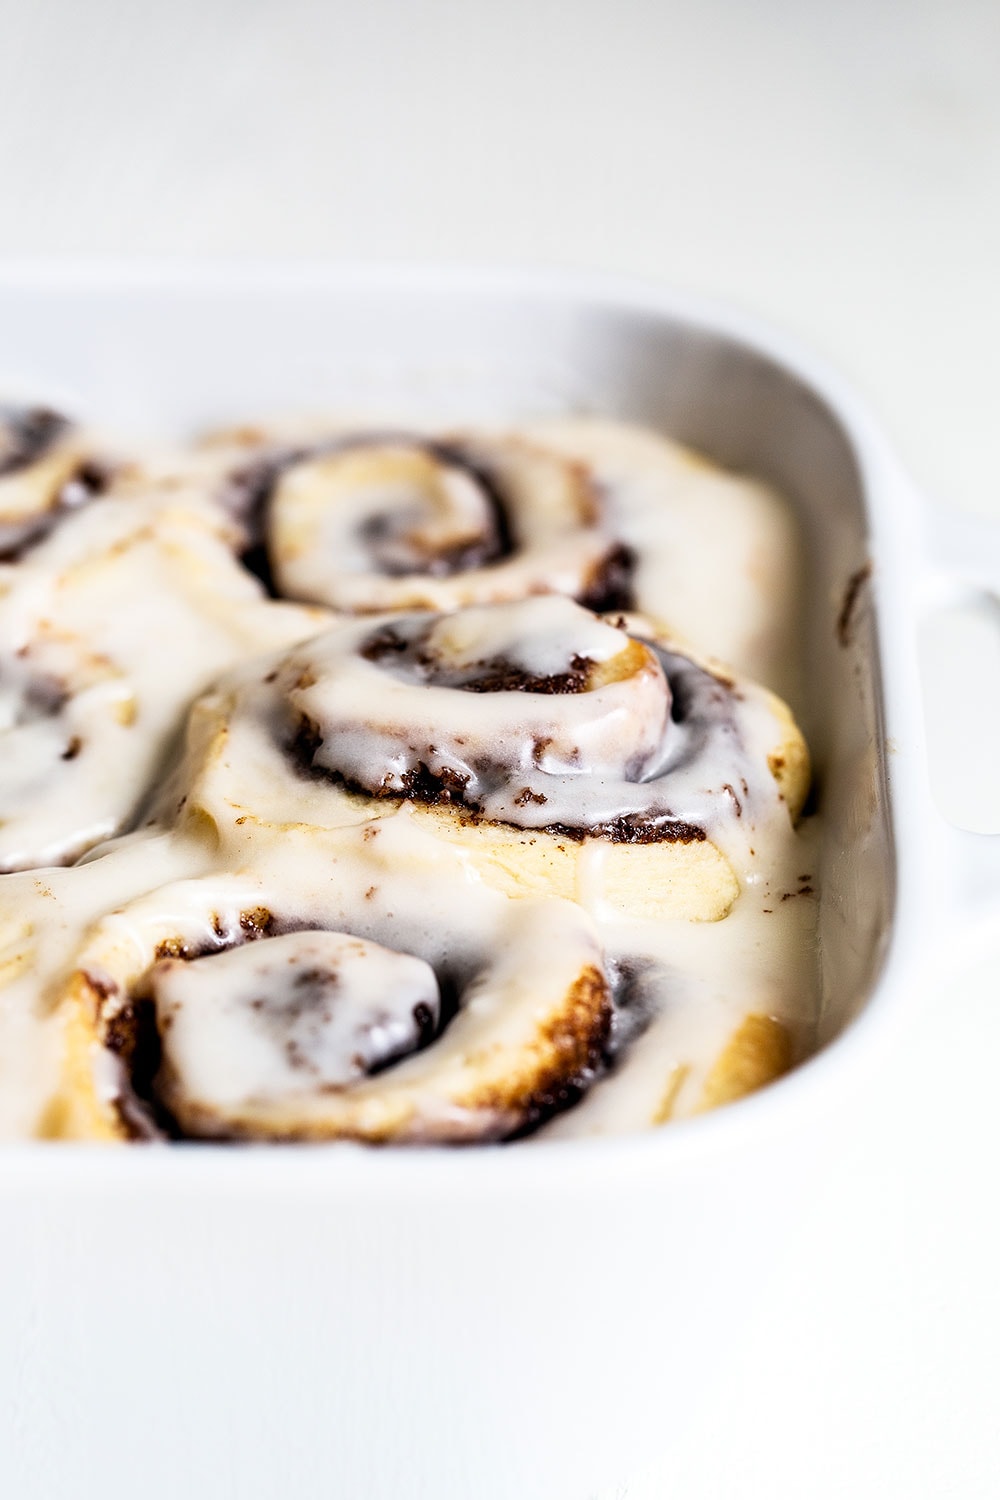 Cinnamon rolls in a baking dish with icing on top